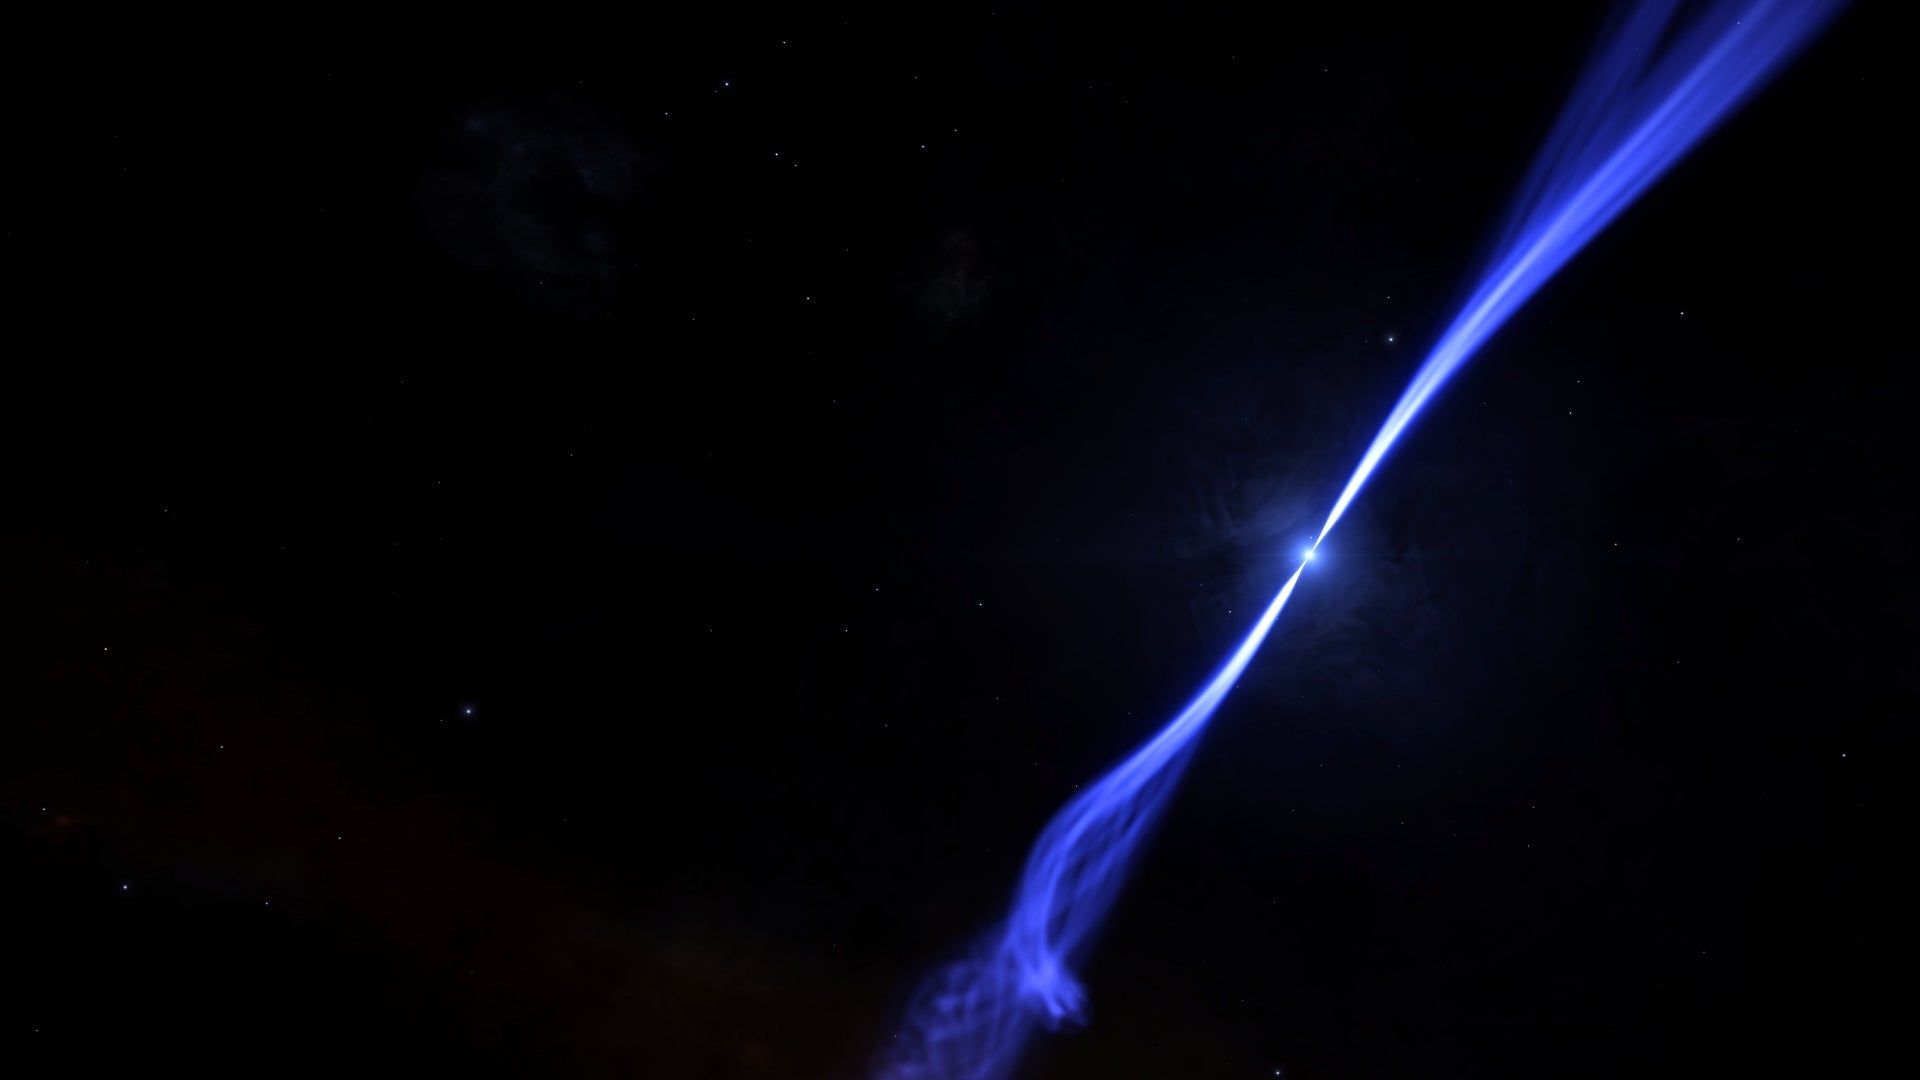 Made this nice Loop of a Neutron Star for Wallpaper Engine as a